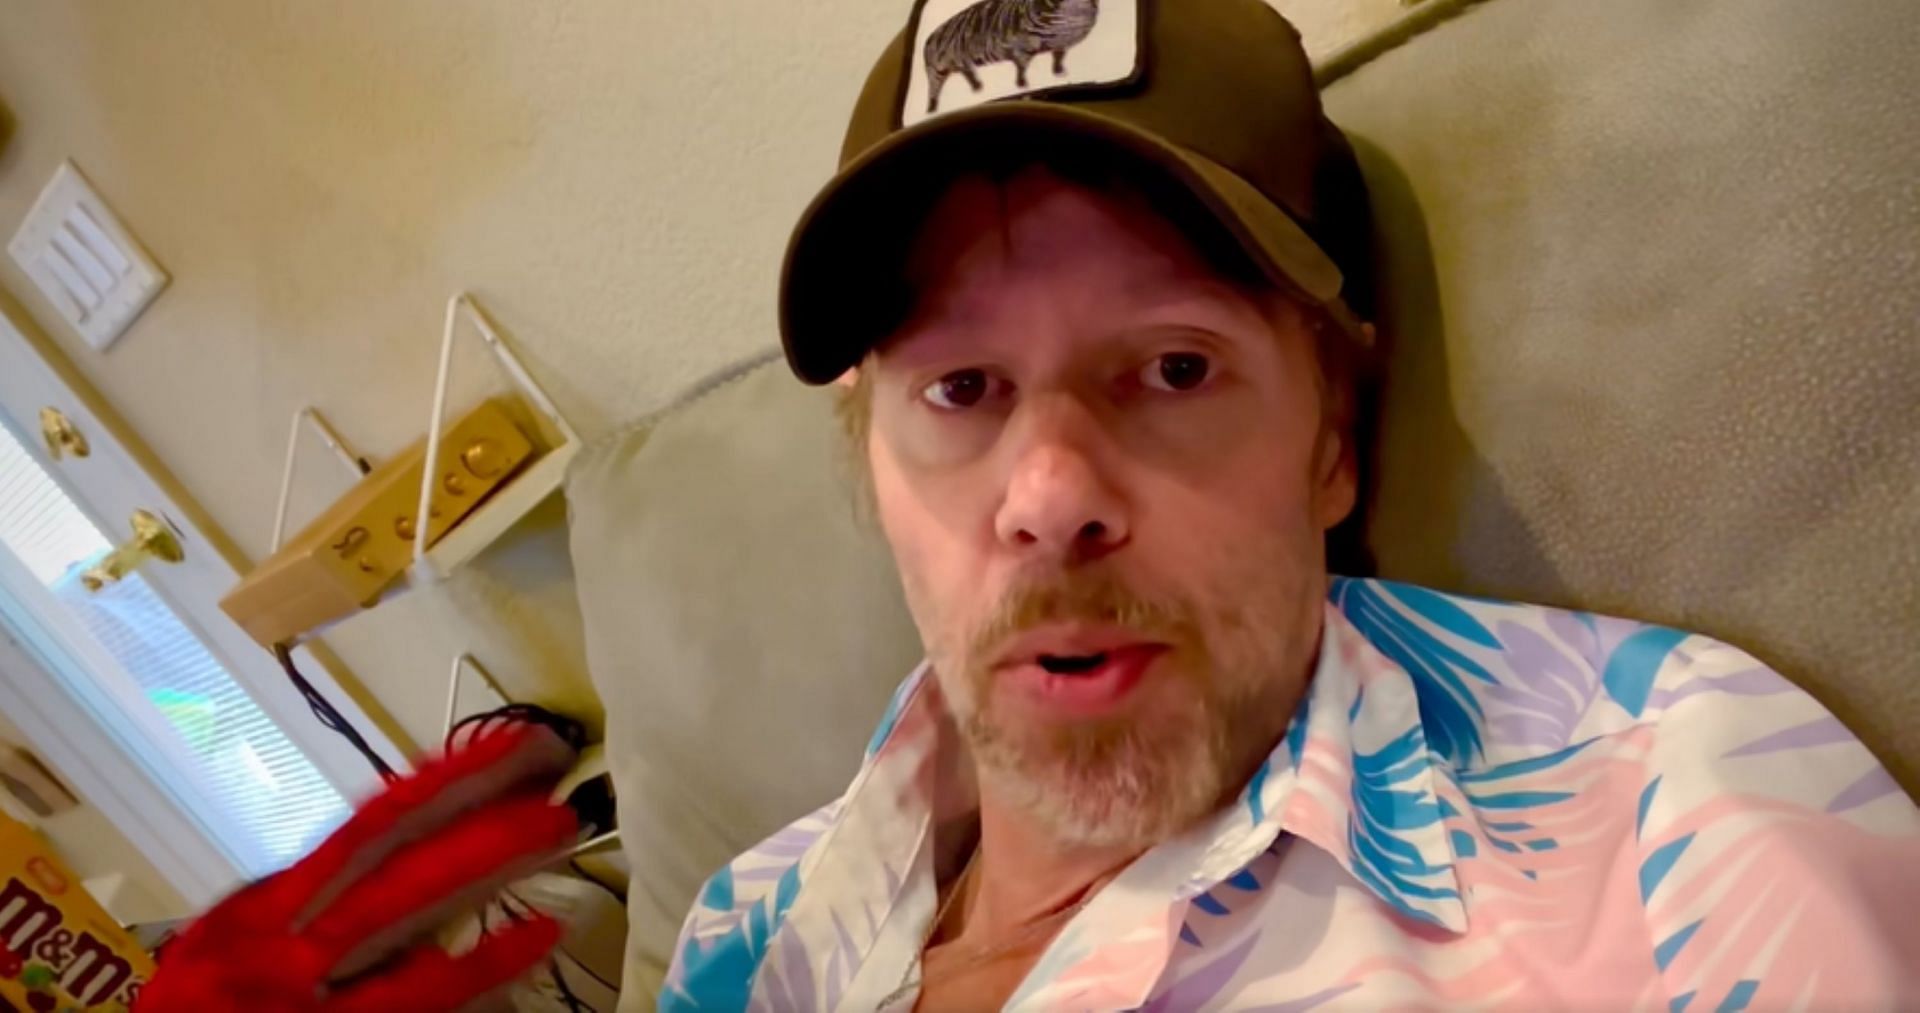 &quot;Toby Keith hospice&quot; video goes viral after country singer